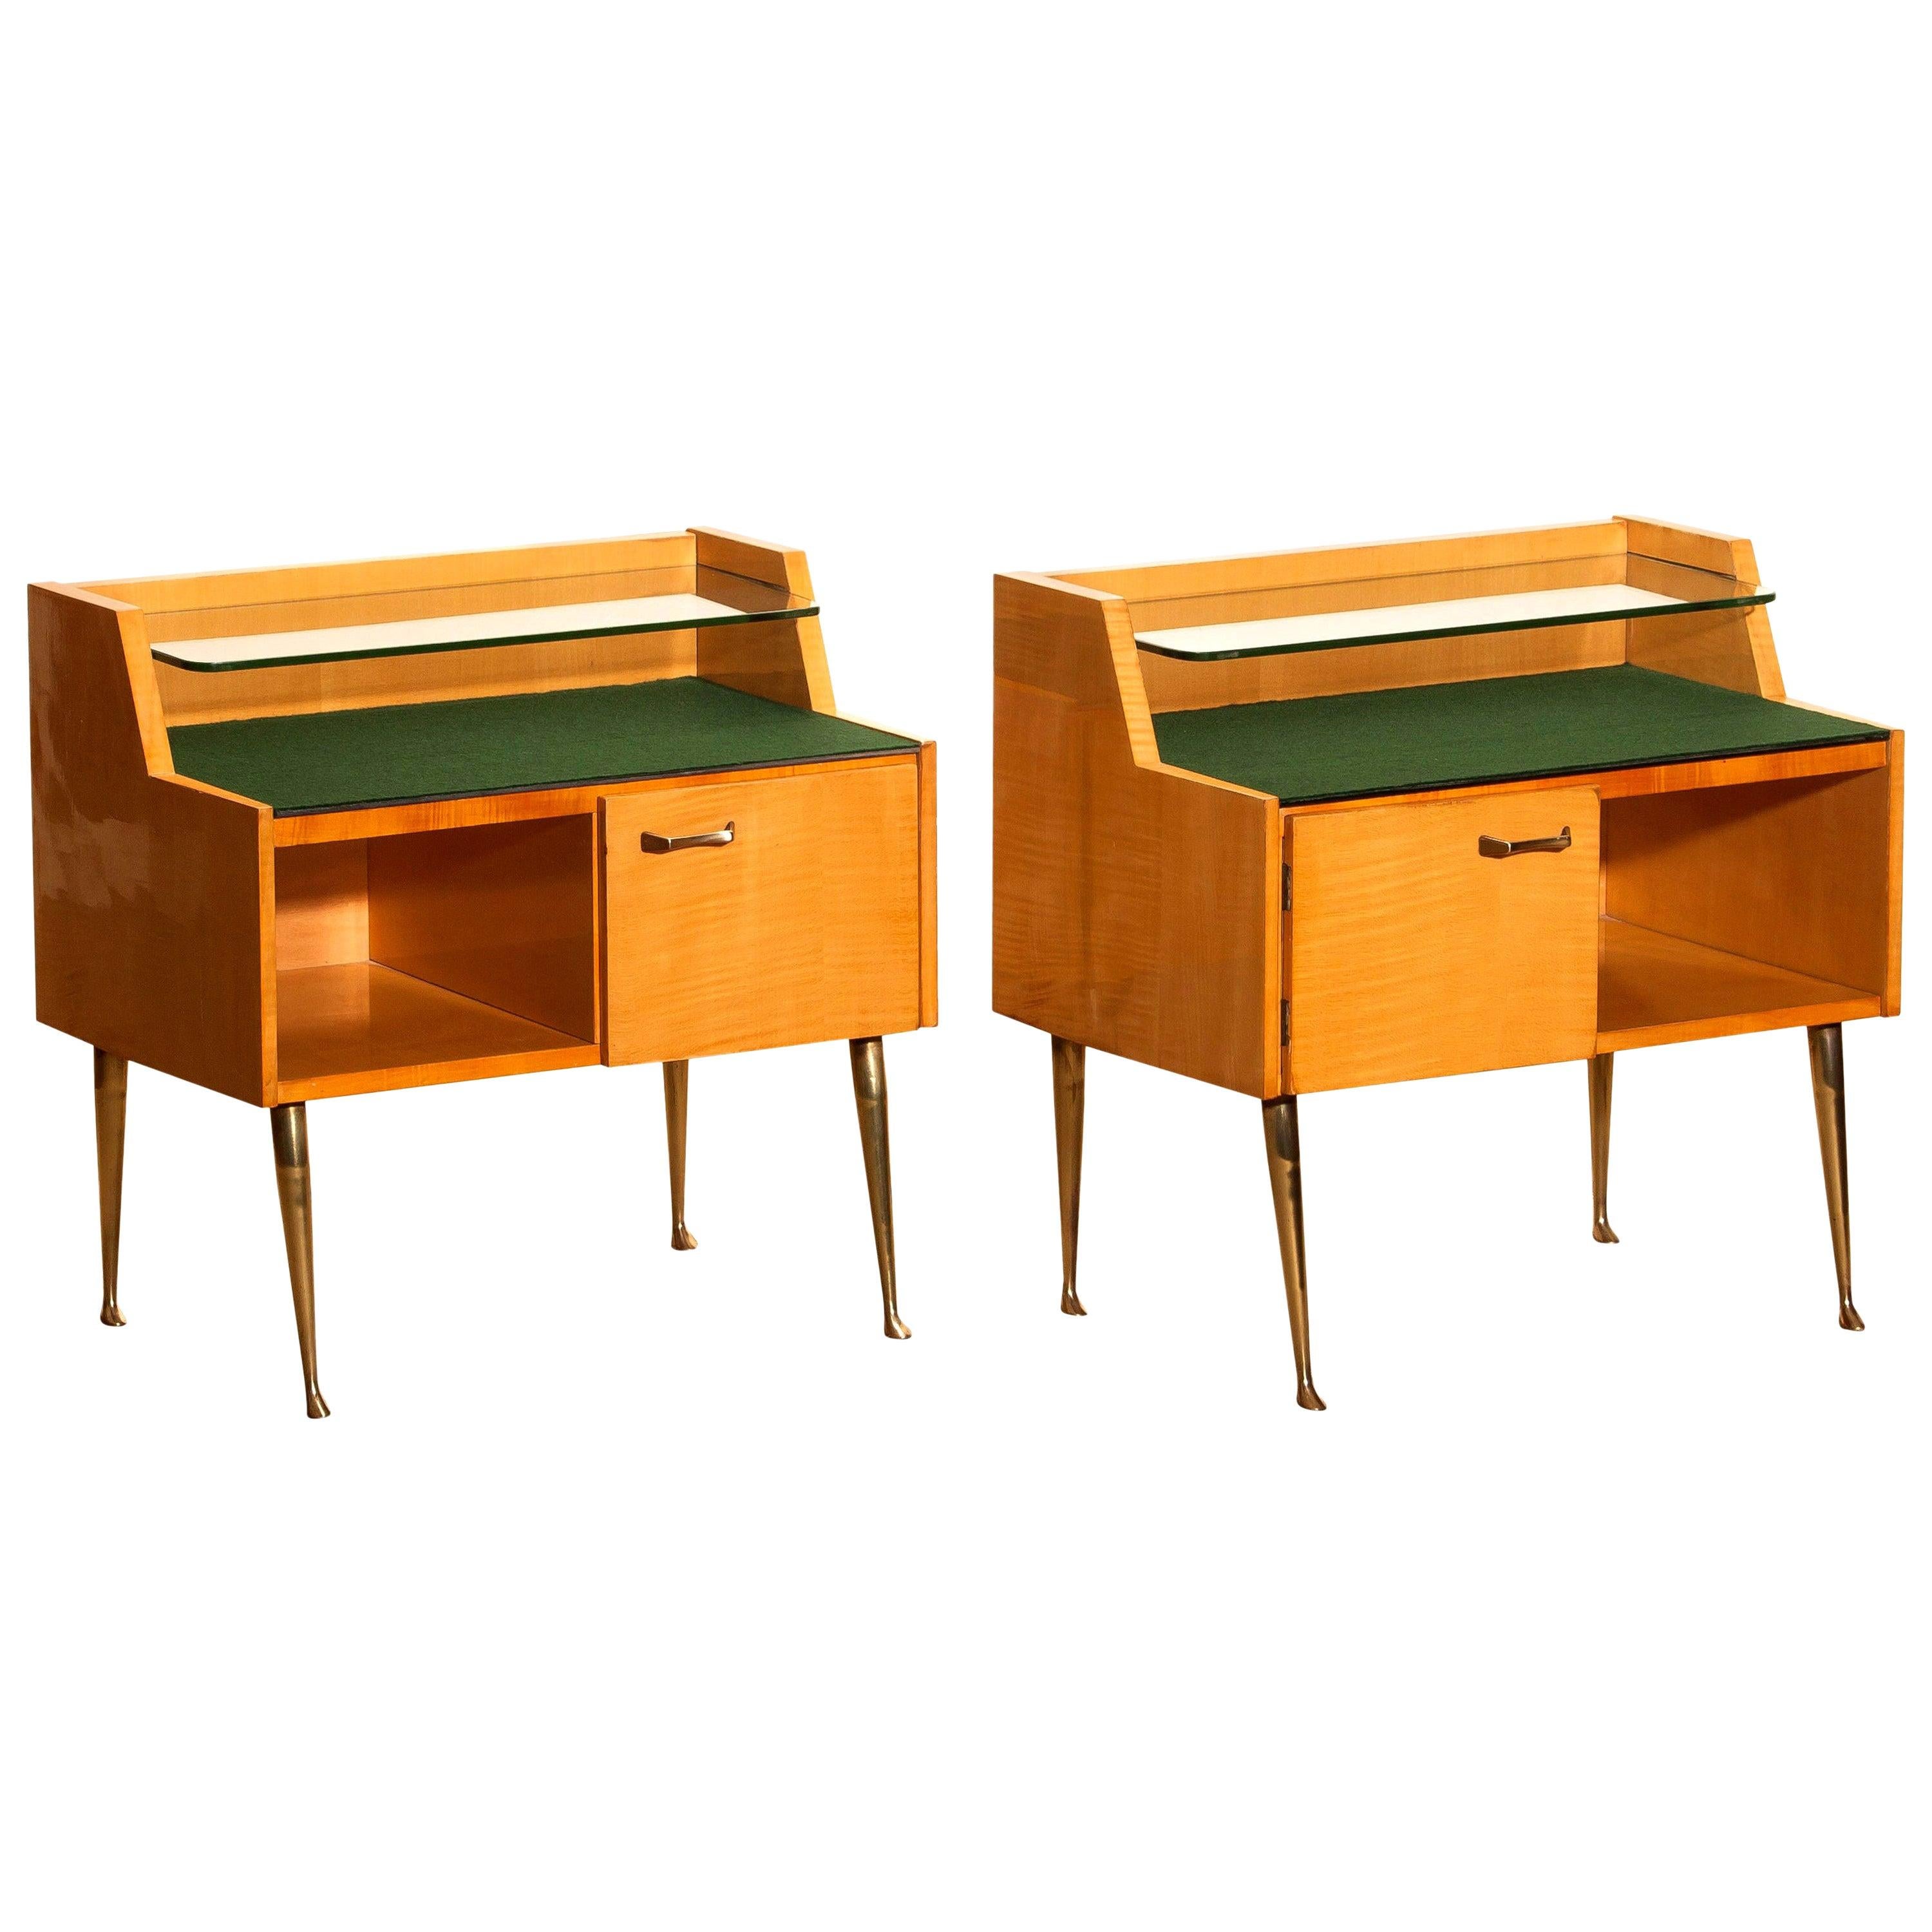 1950s, Pair of Italian Nightstands in Maple with Brass Legs by Paolo Buffa